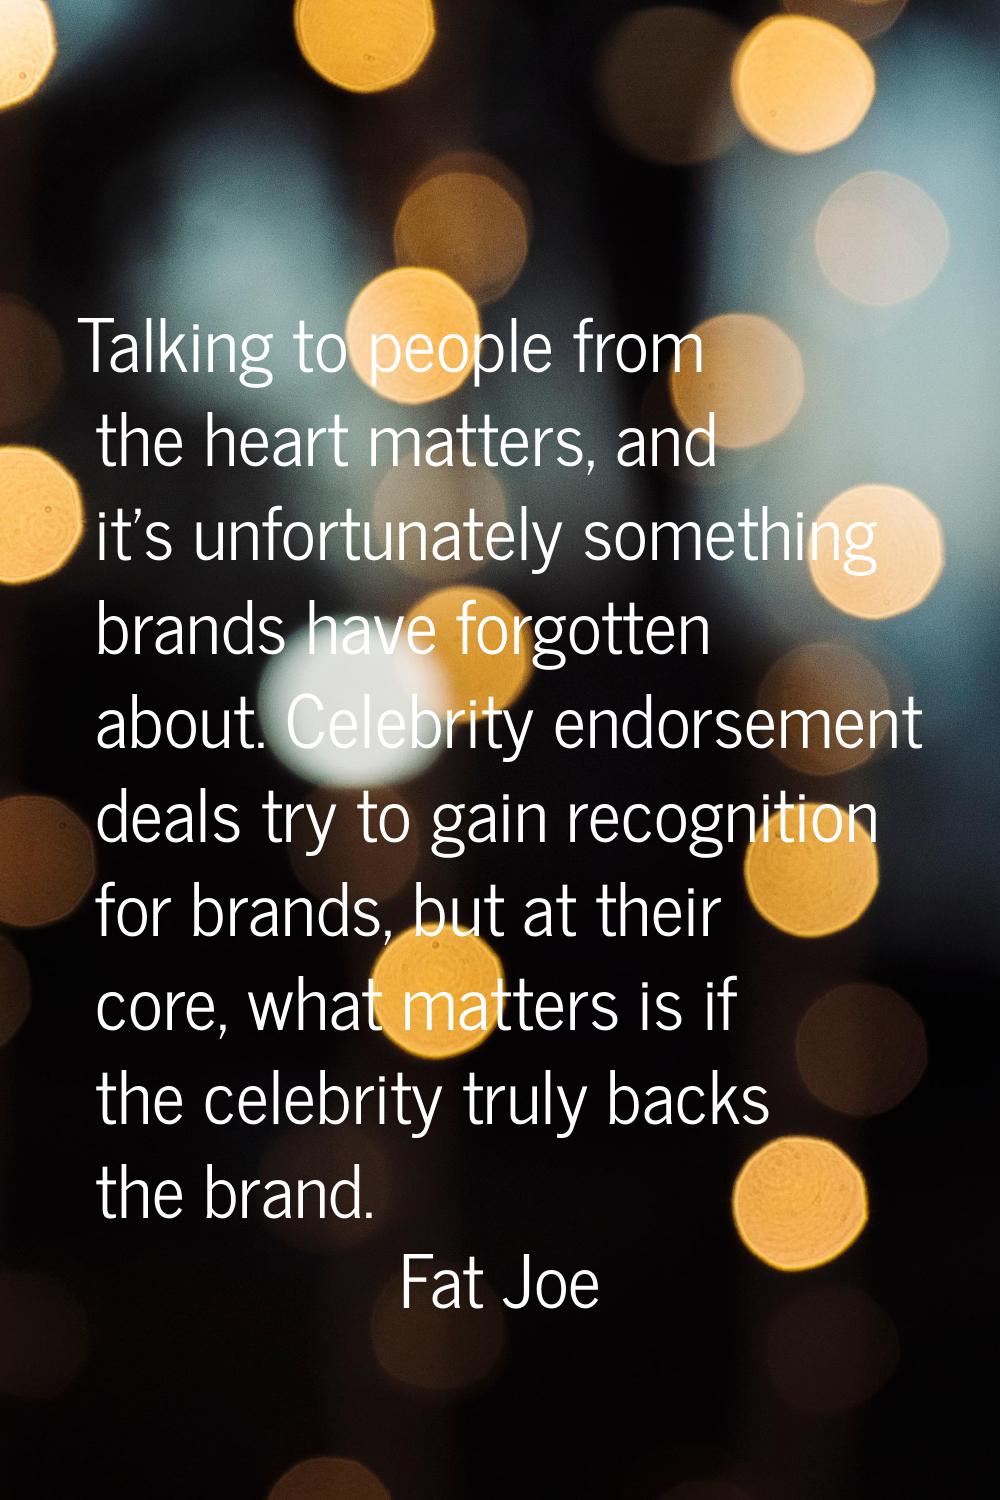 Talking to people from the heart matters, and it's unfortunately something brands have forgotten ab